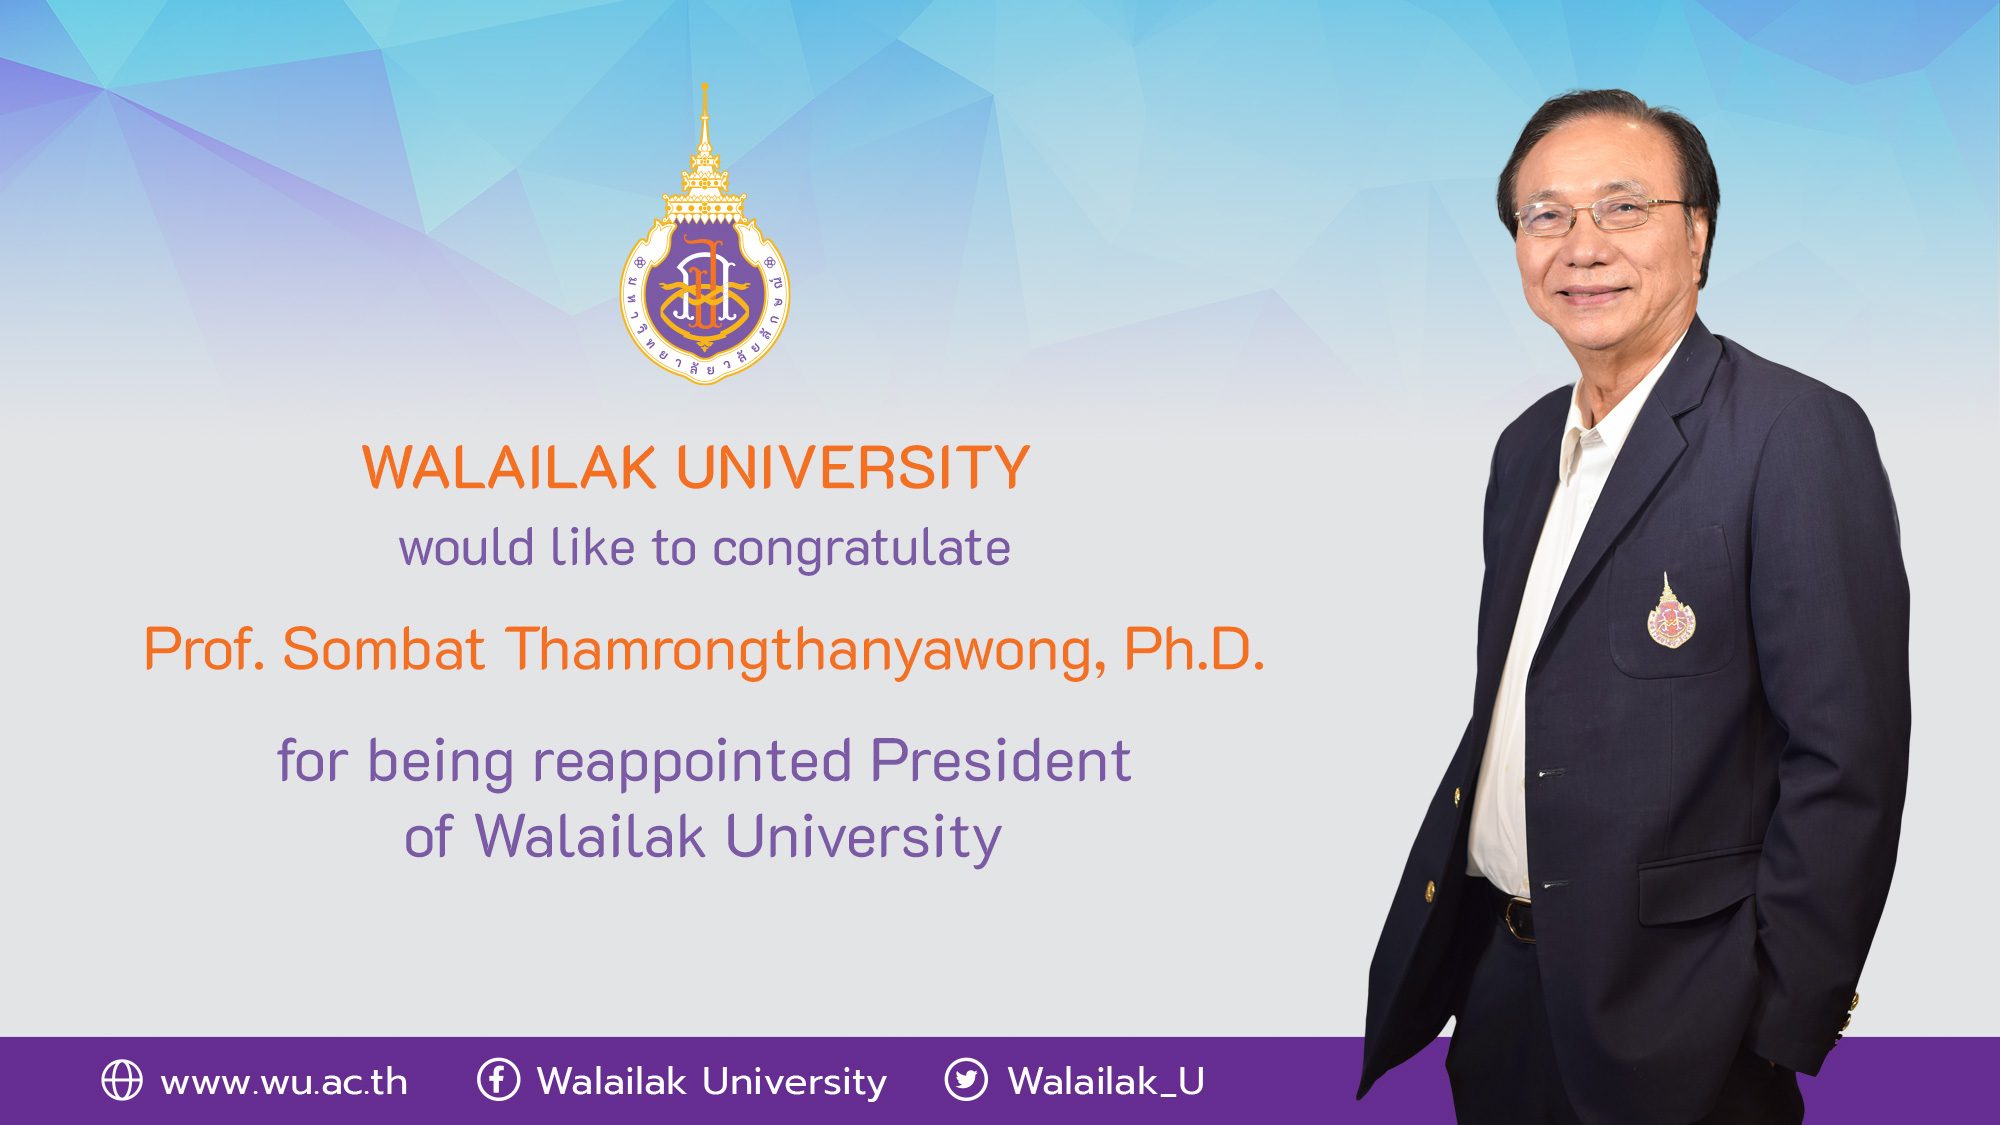 Walailak University Council has approved the reappointment of Prof. Sombat Thamrongthanyawong, Ph.D. as President of Walailak University for a four-year term effective January 12, 2022